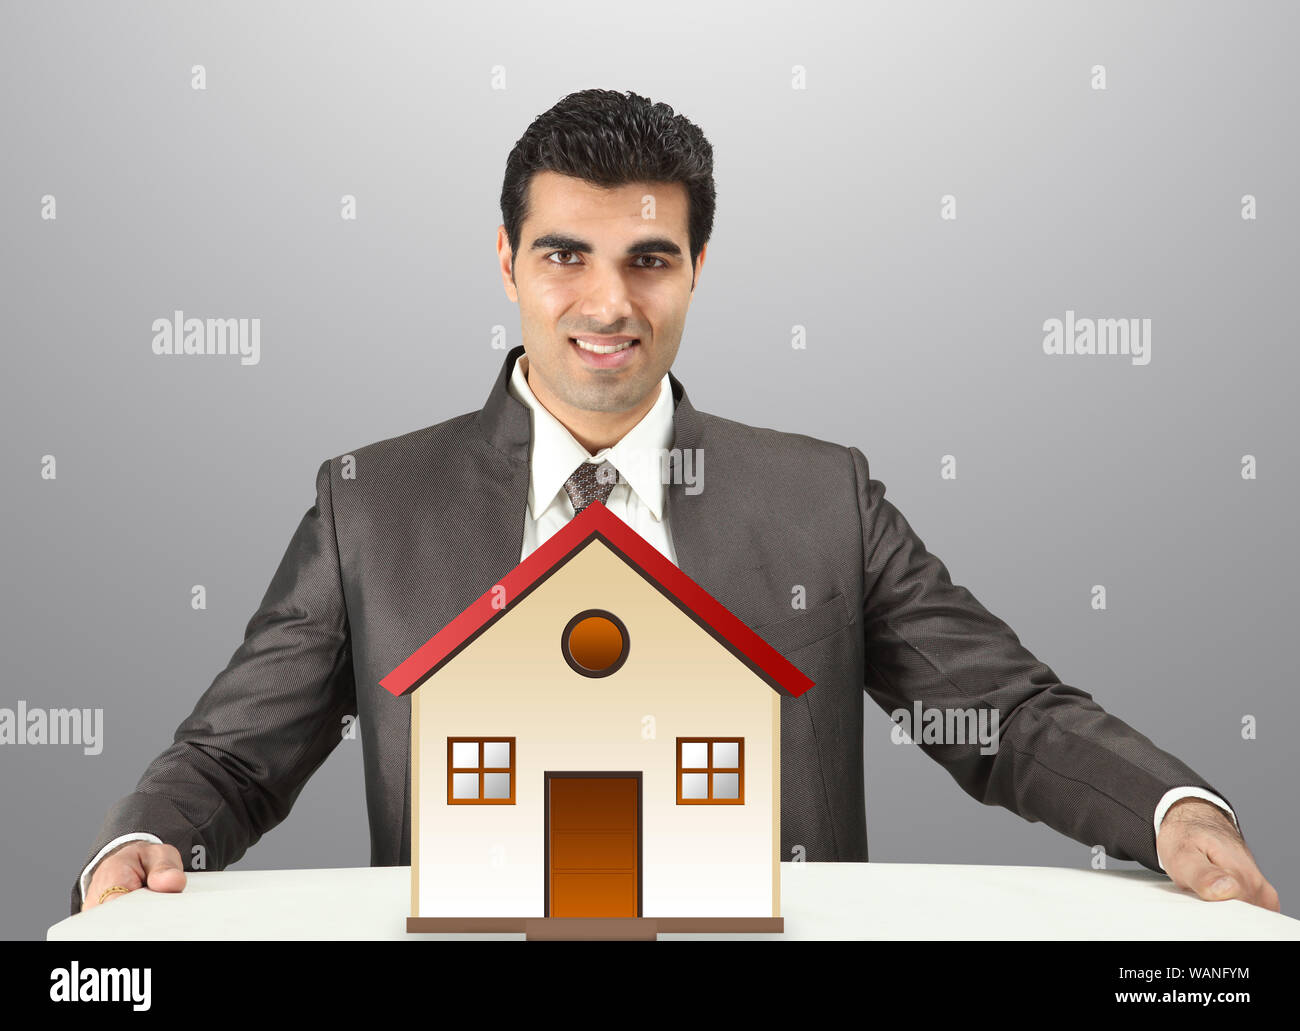 Real estate agent showing dream home Stock Photo